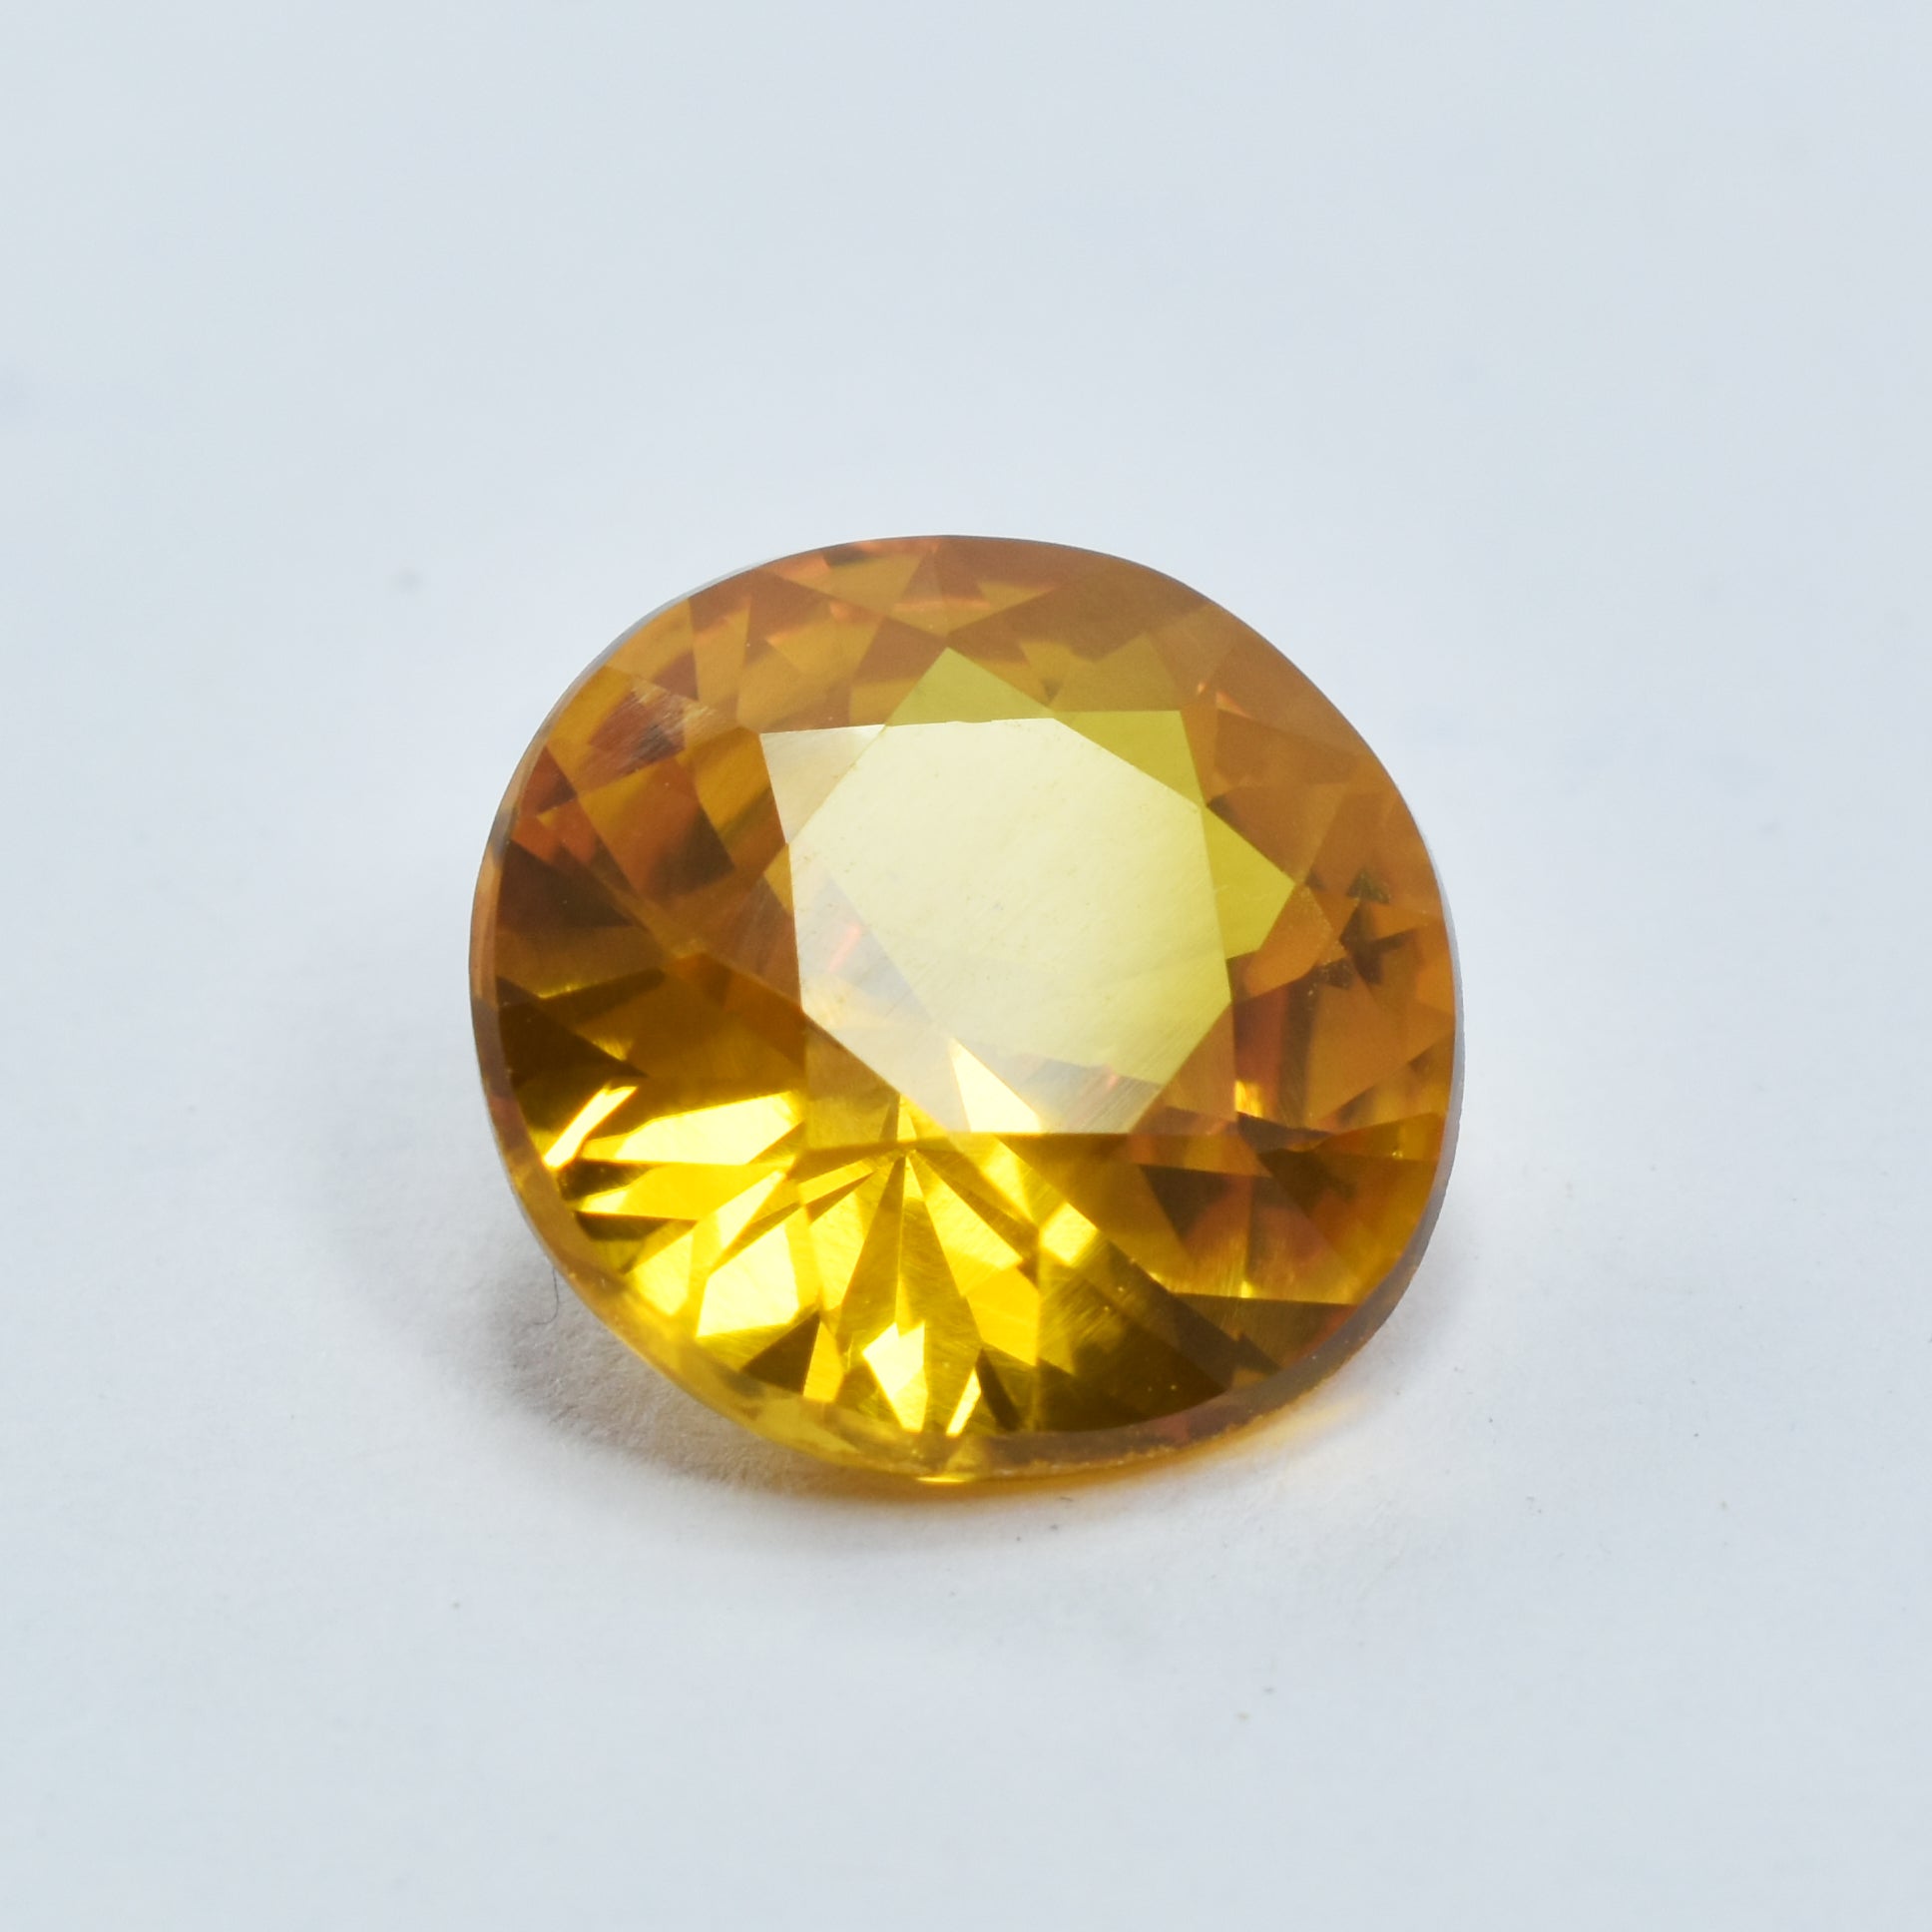 Sri-Lanka Sapphire Round Shape 6.05 Carat Natural Certified Yellow Sapphire Loose Gemstone Pretty Sapphire For Engagement Rings